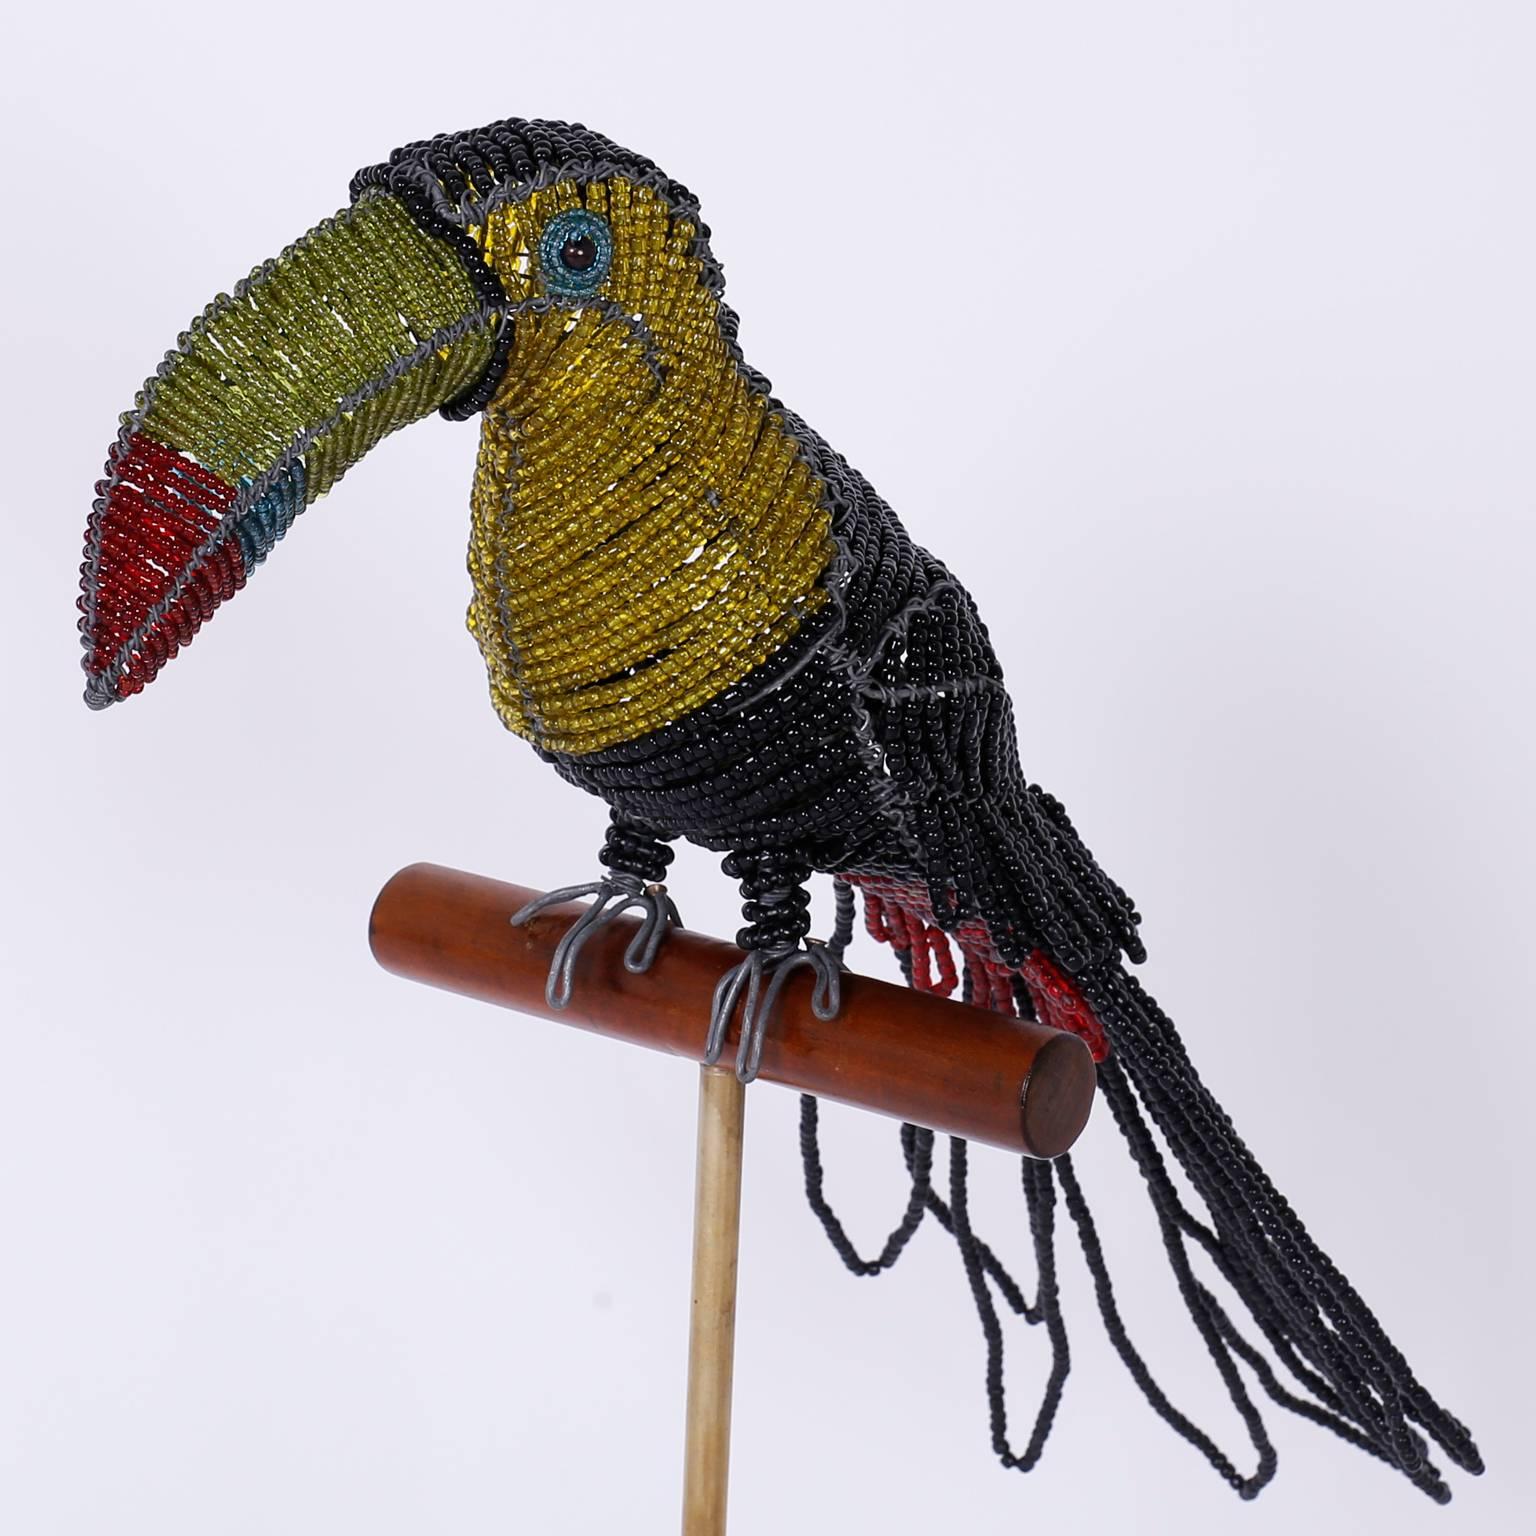 Amused and amusing bird sculpture crafted with glass beads on a metal frame and sitting on a wood perch supported by a brass rod on a Lucite base.